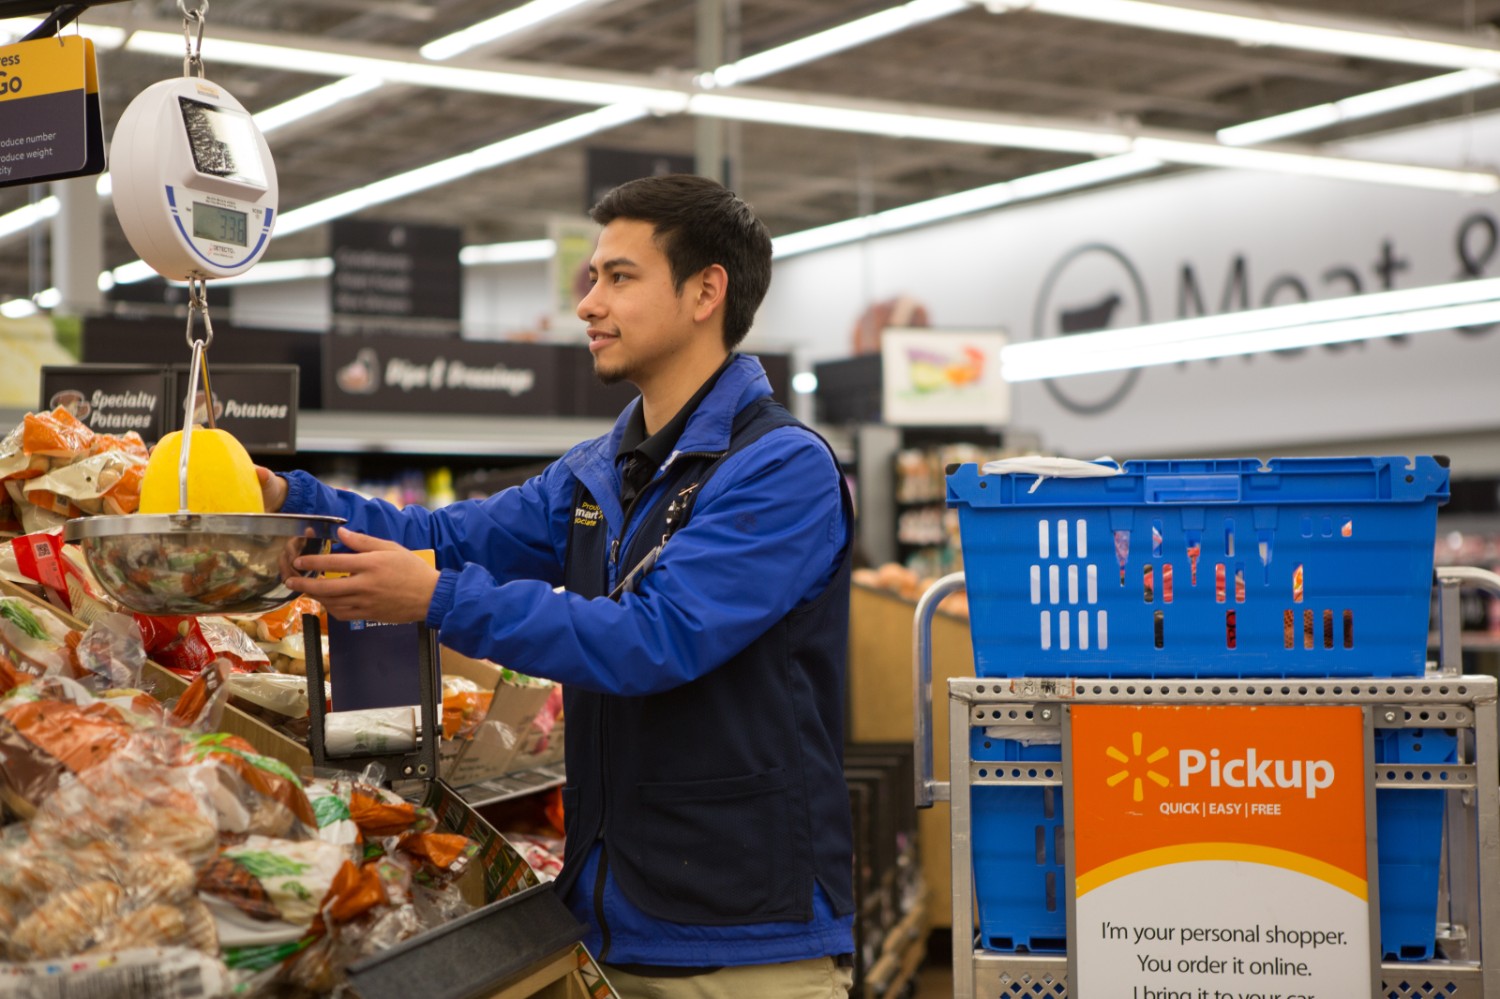 Walmart Grocery Review: How the Grocery Delivery Service Works